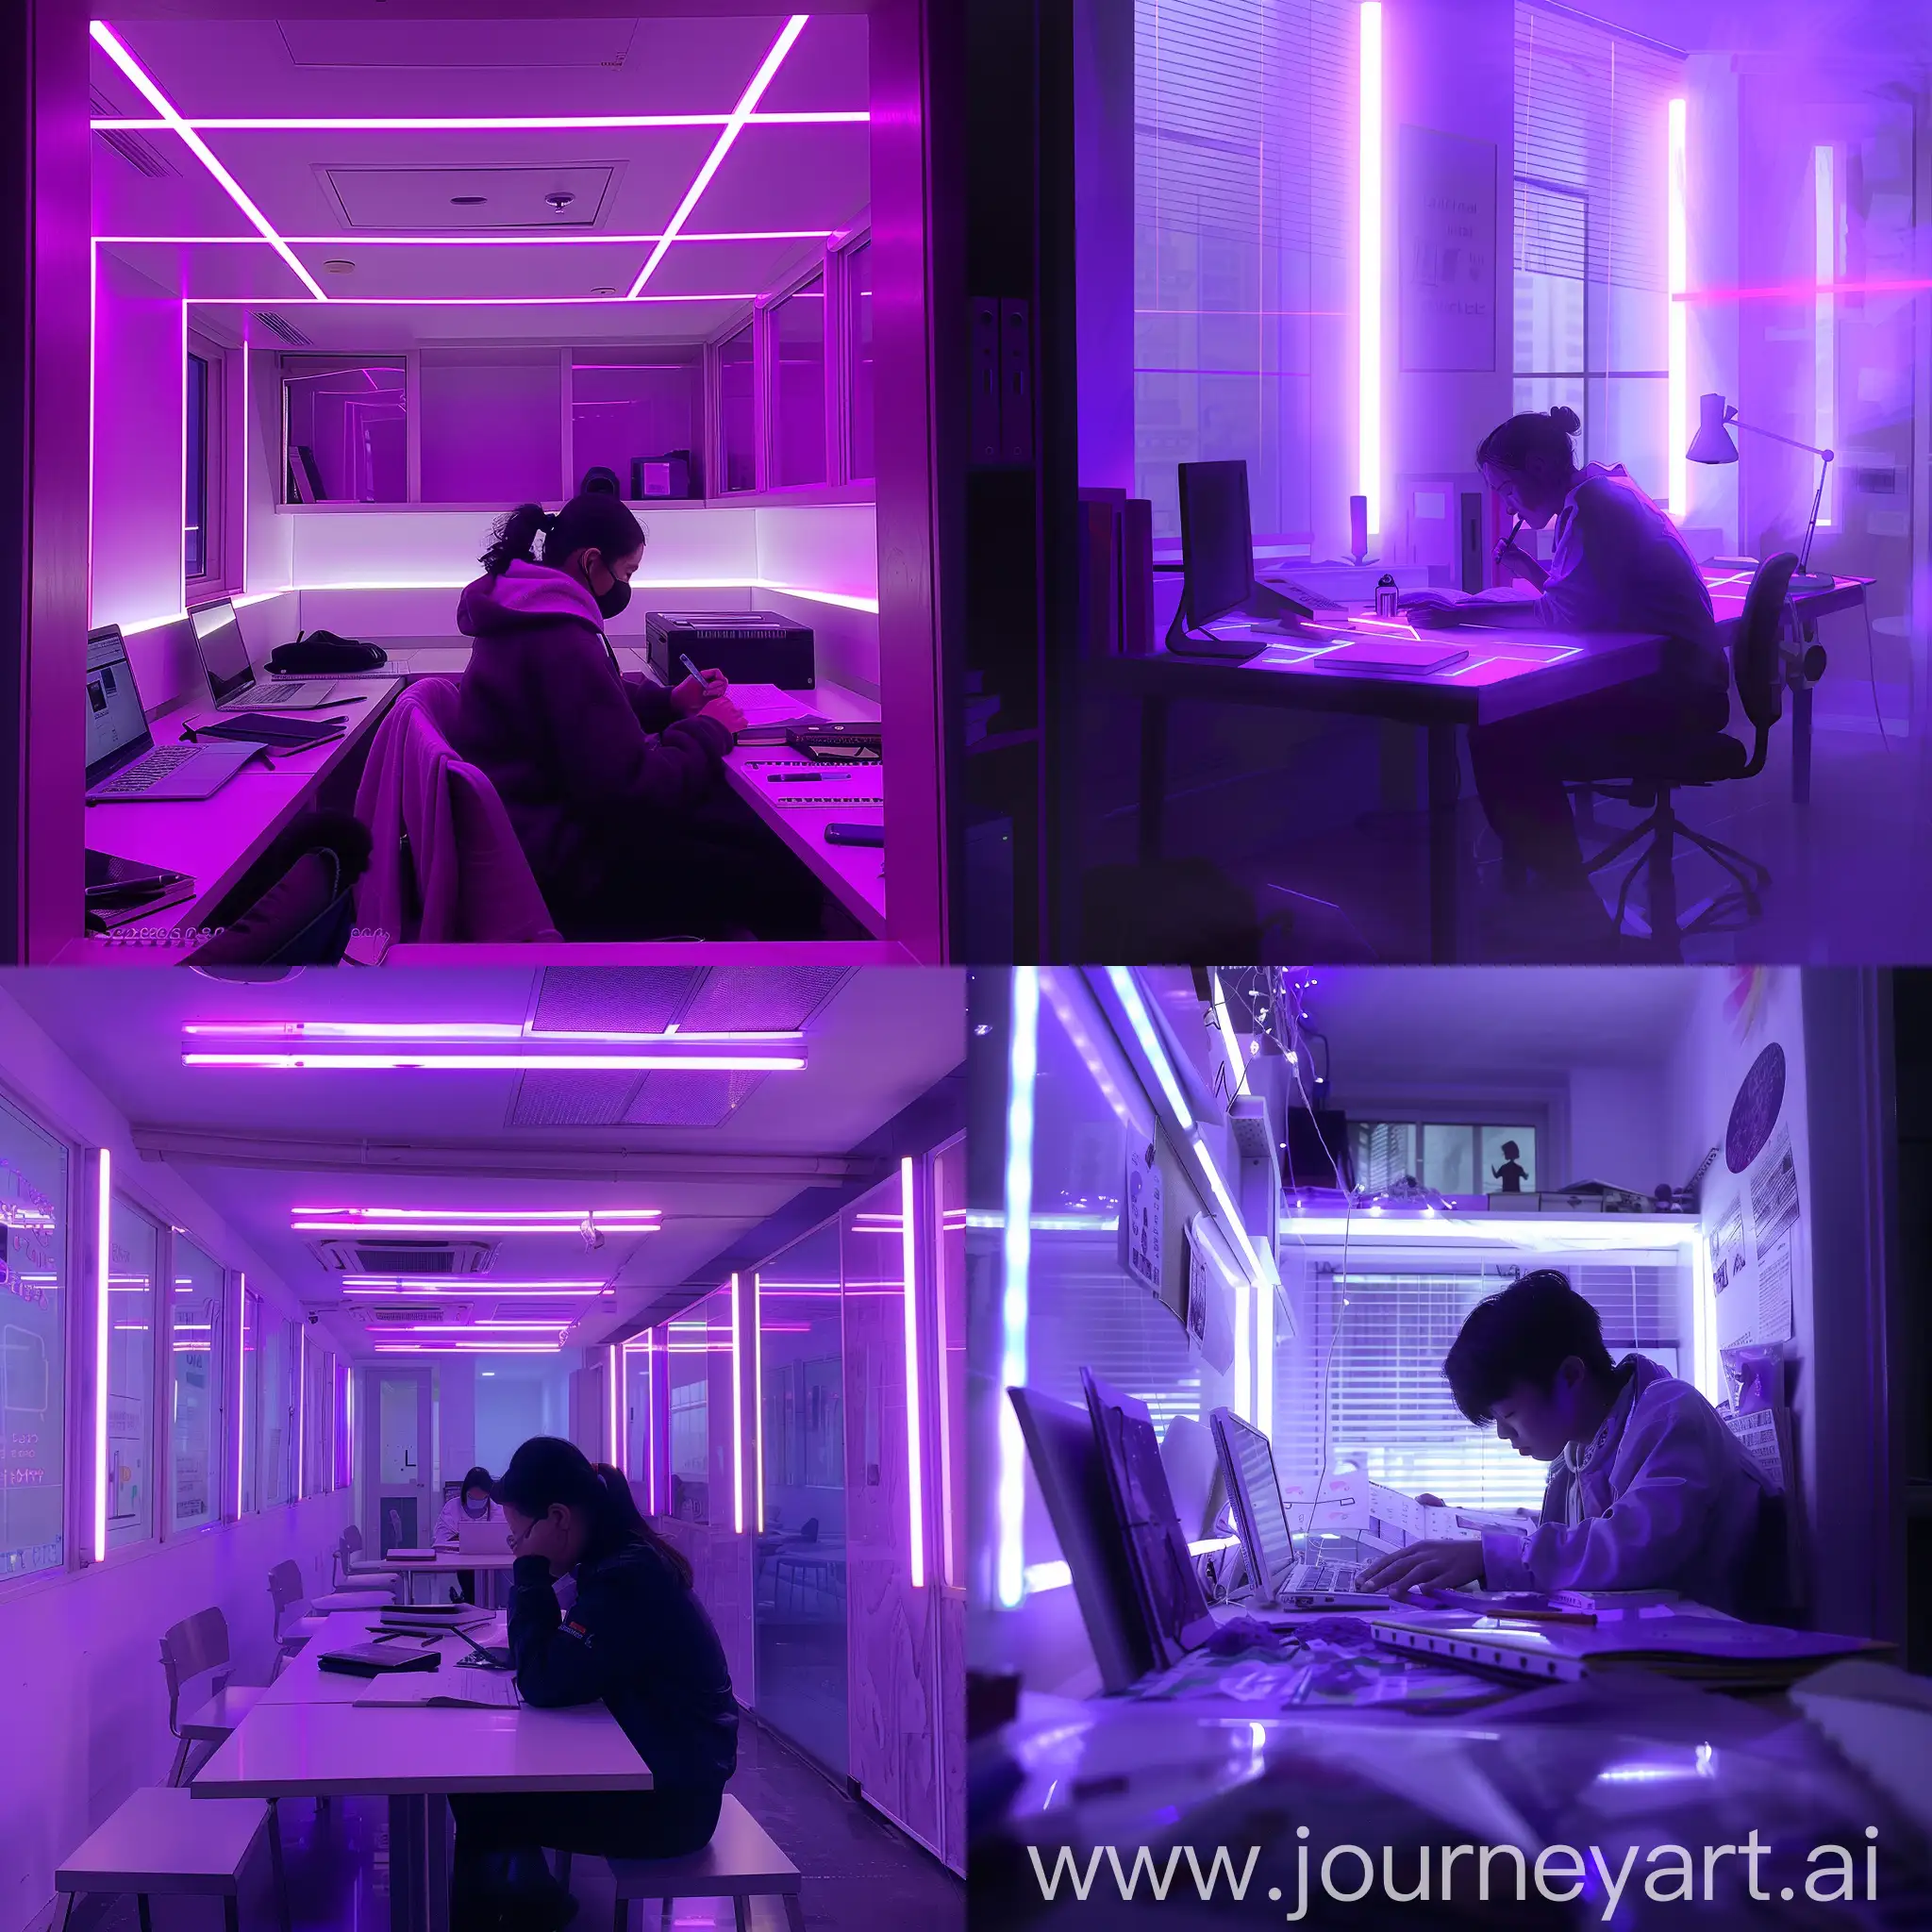 Focused-Student-Studying-in-Purple-and-White-Lit-Study-Room